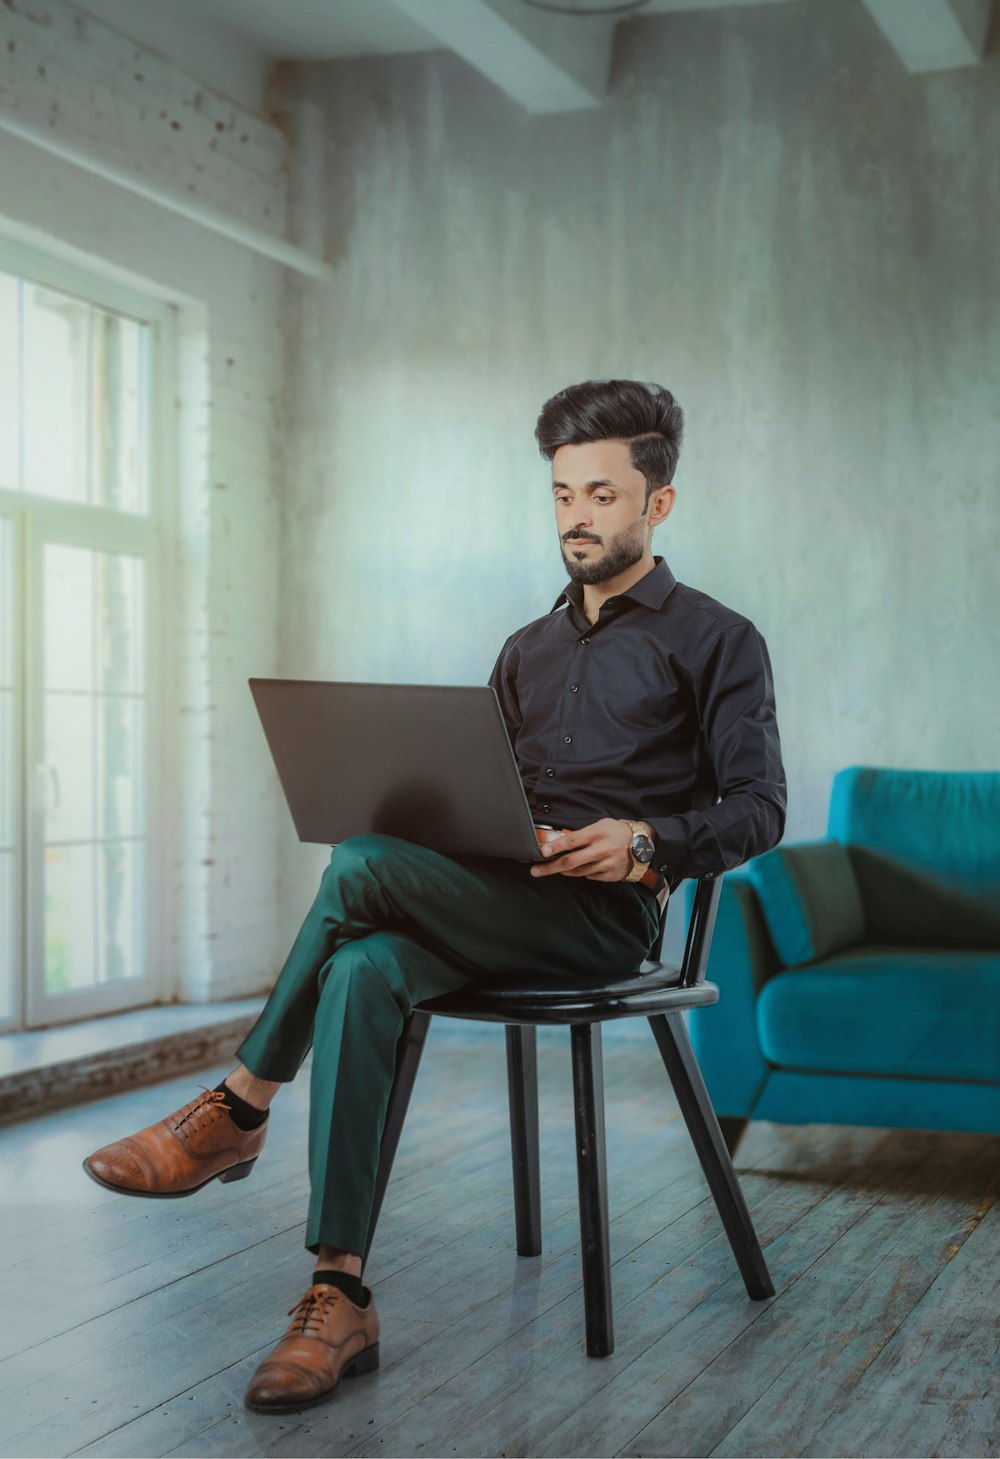 a man sitting on a chair using a laptop